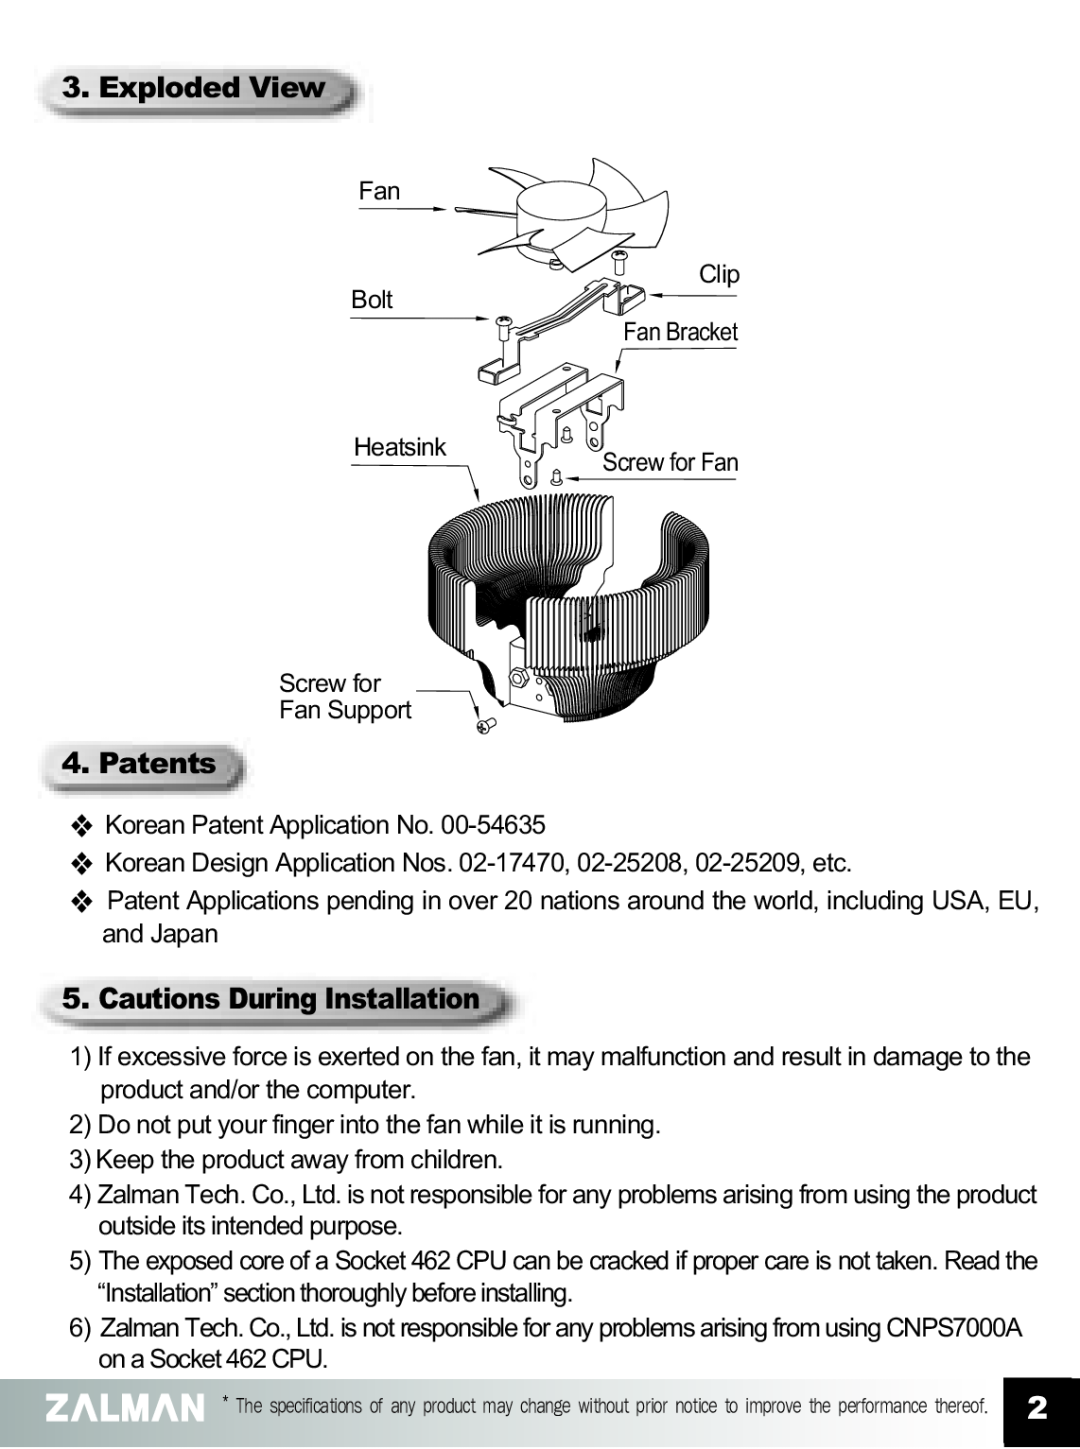 ZALMAN CNPS7000A manual Exploded View, Patents, Cautions During Installation 